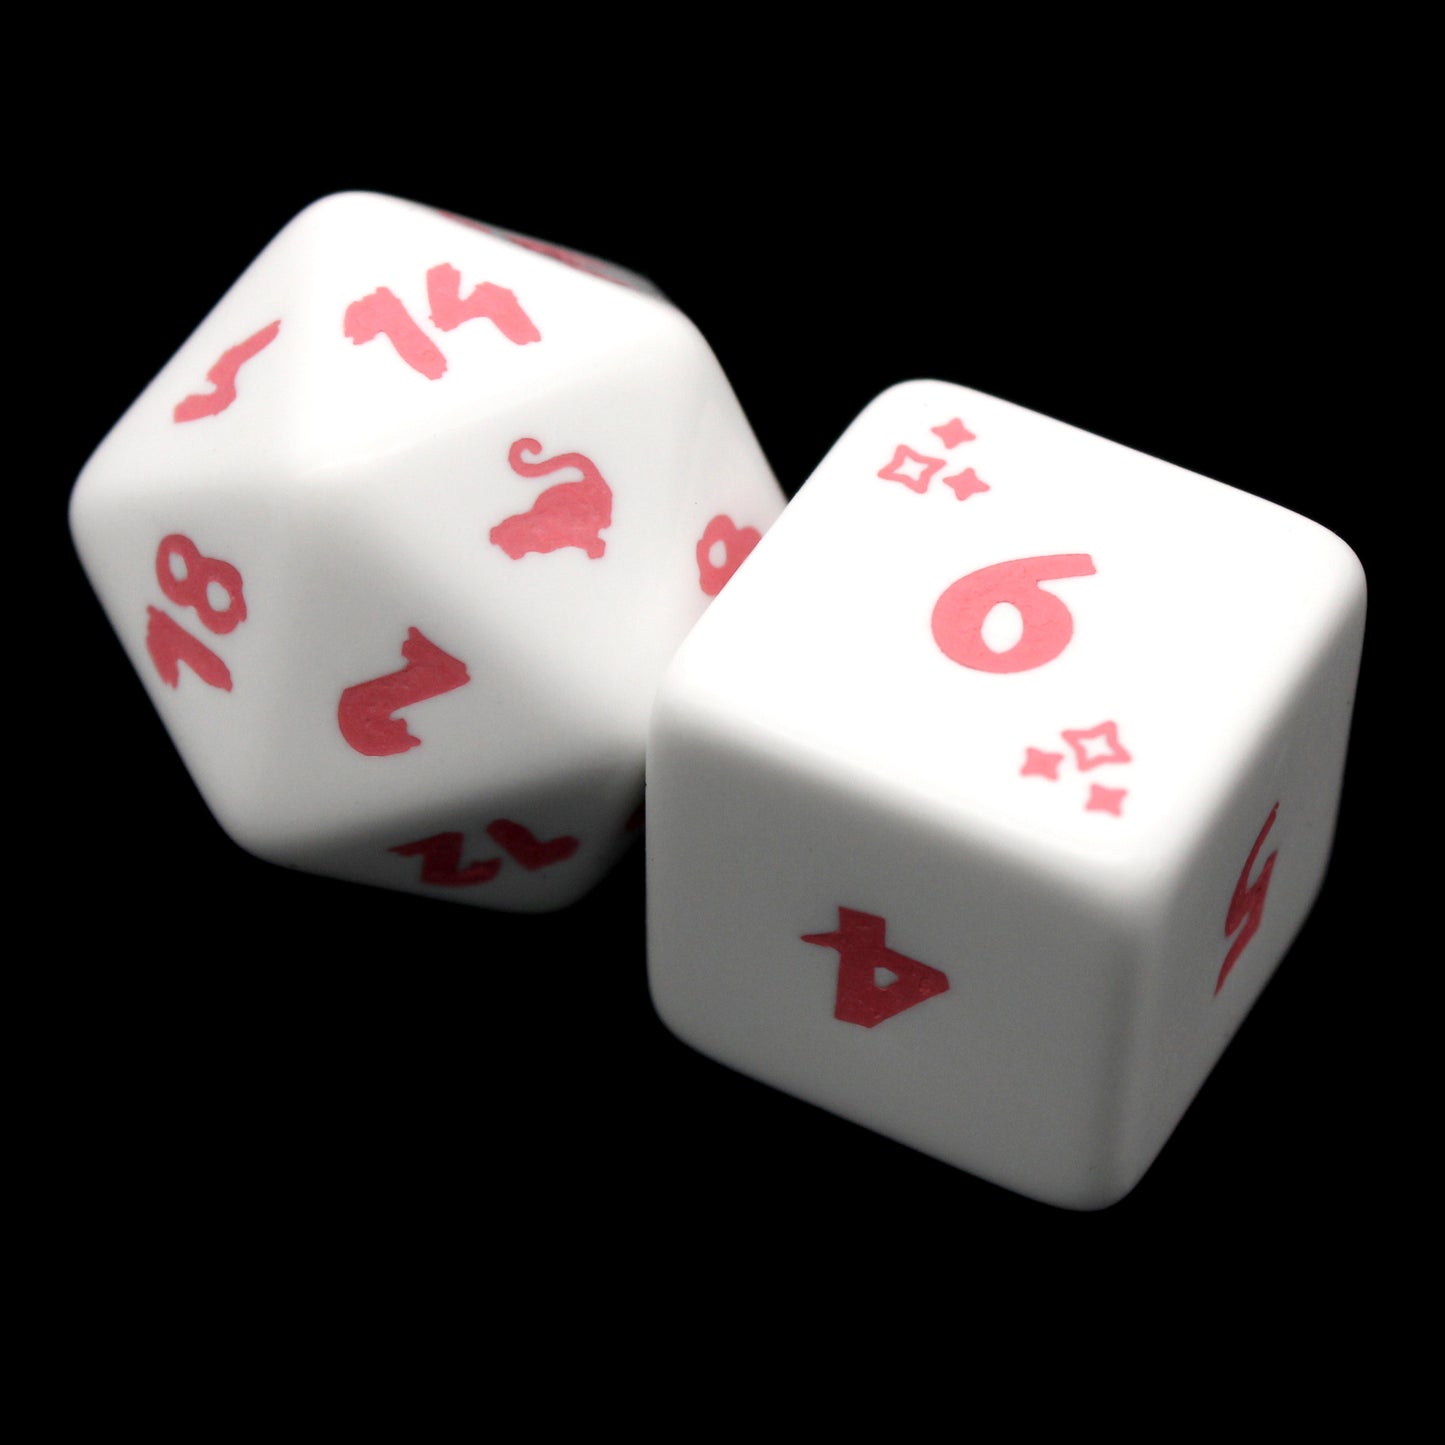 Felis is an 8-piece engraved acrylic set in soft white with cat transformation icons inked in purrfect pink. Included is an alternate d20 in reverse colors.